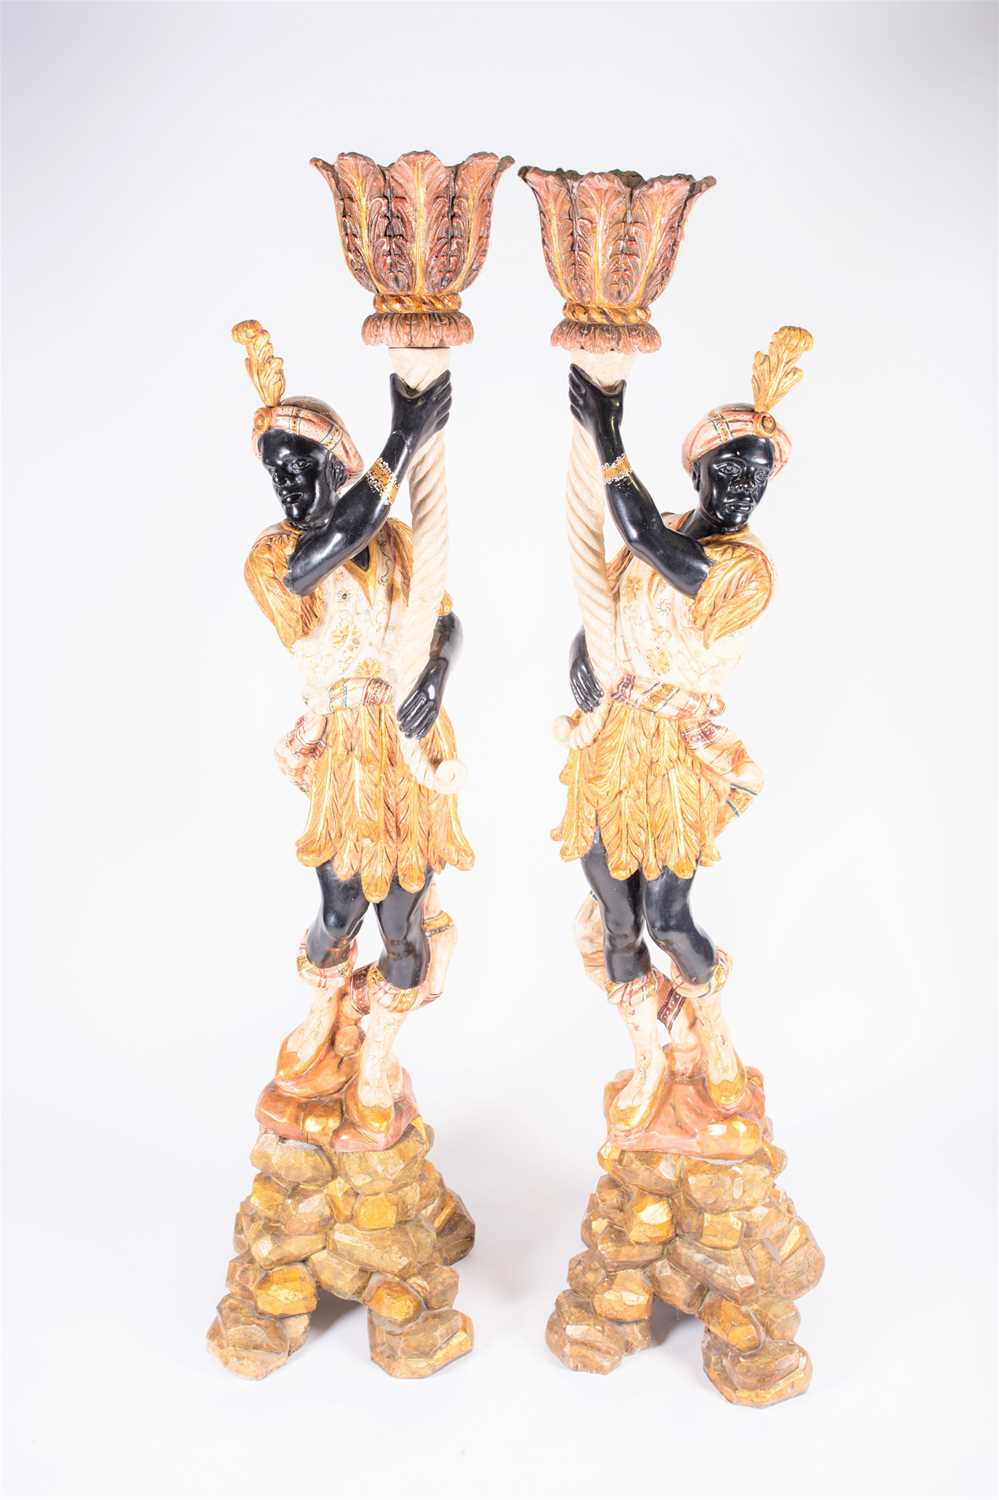 A pair of large 20th century blackamoors, wood carved with bright polychrome decoration, each